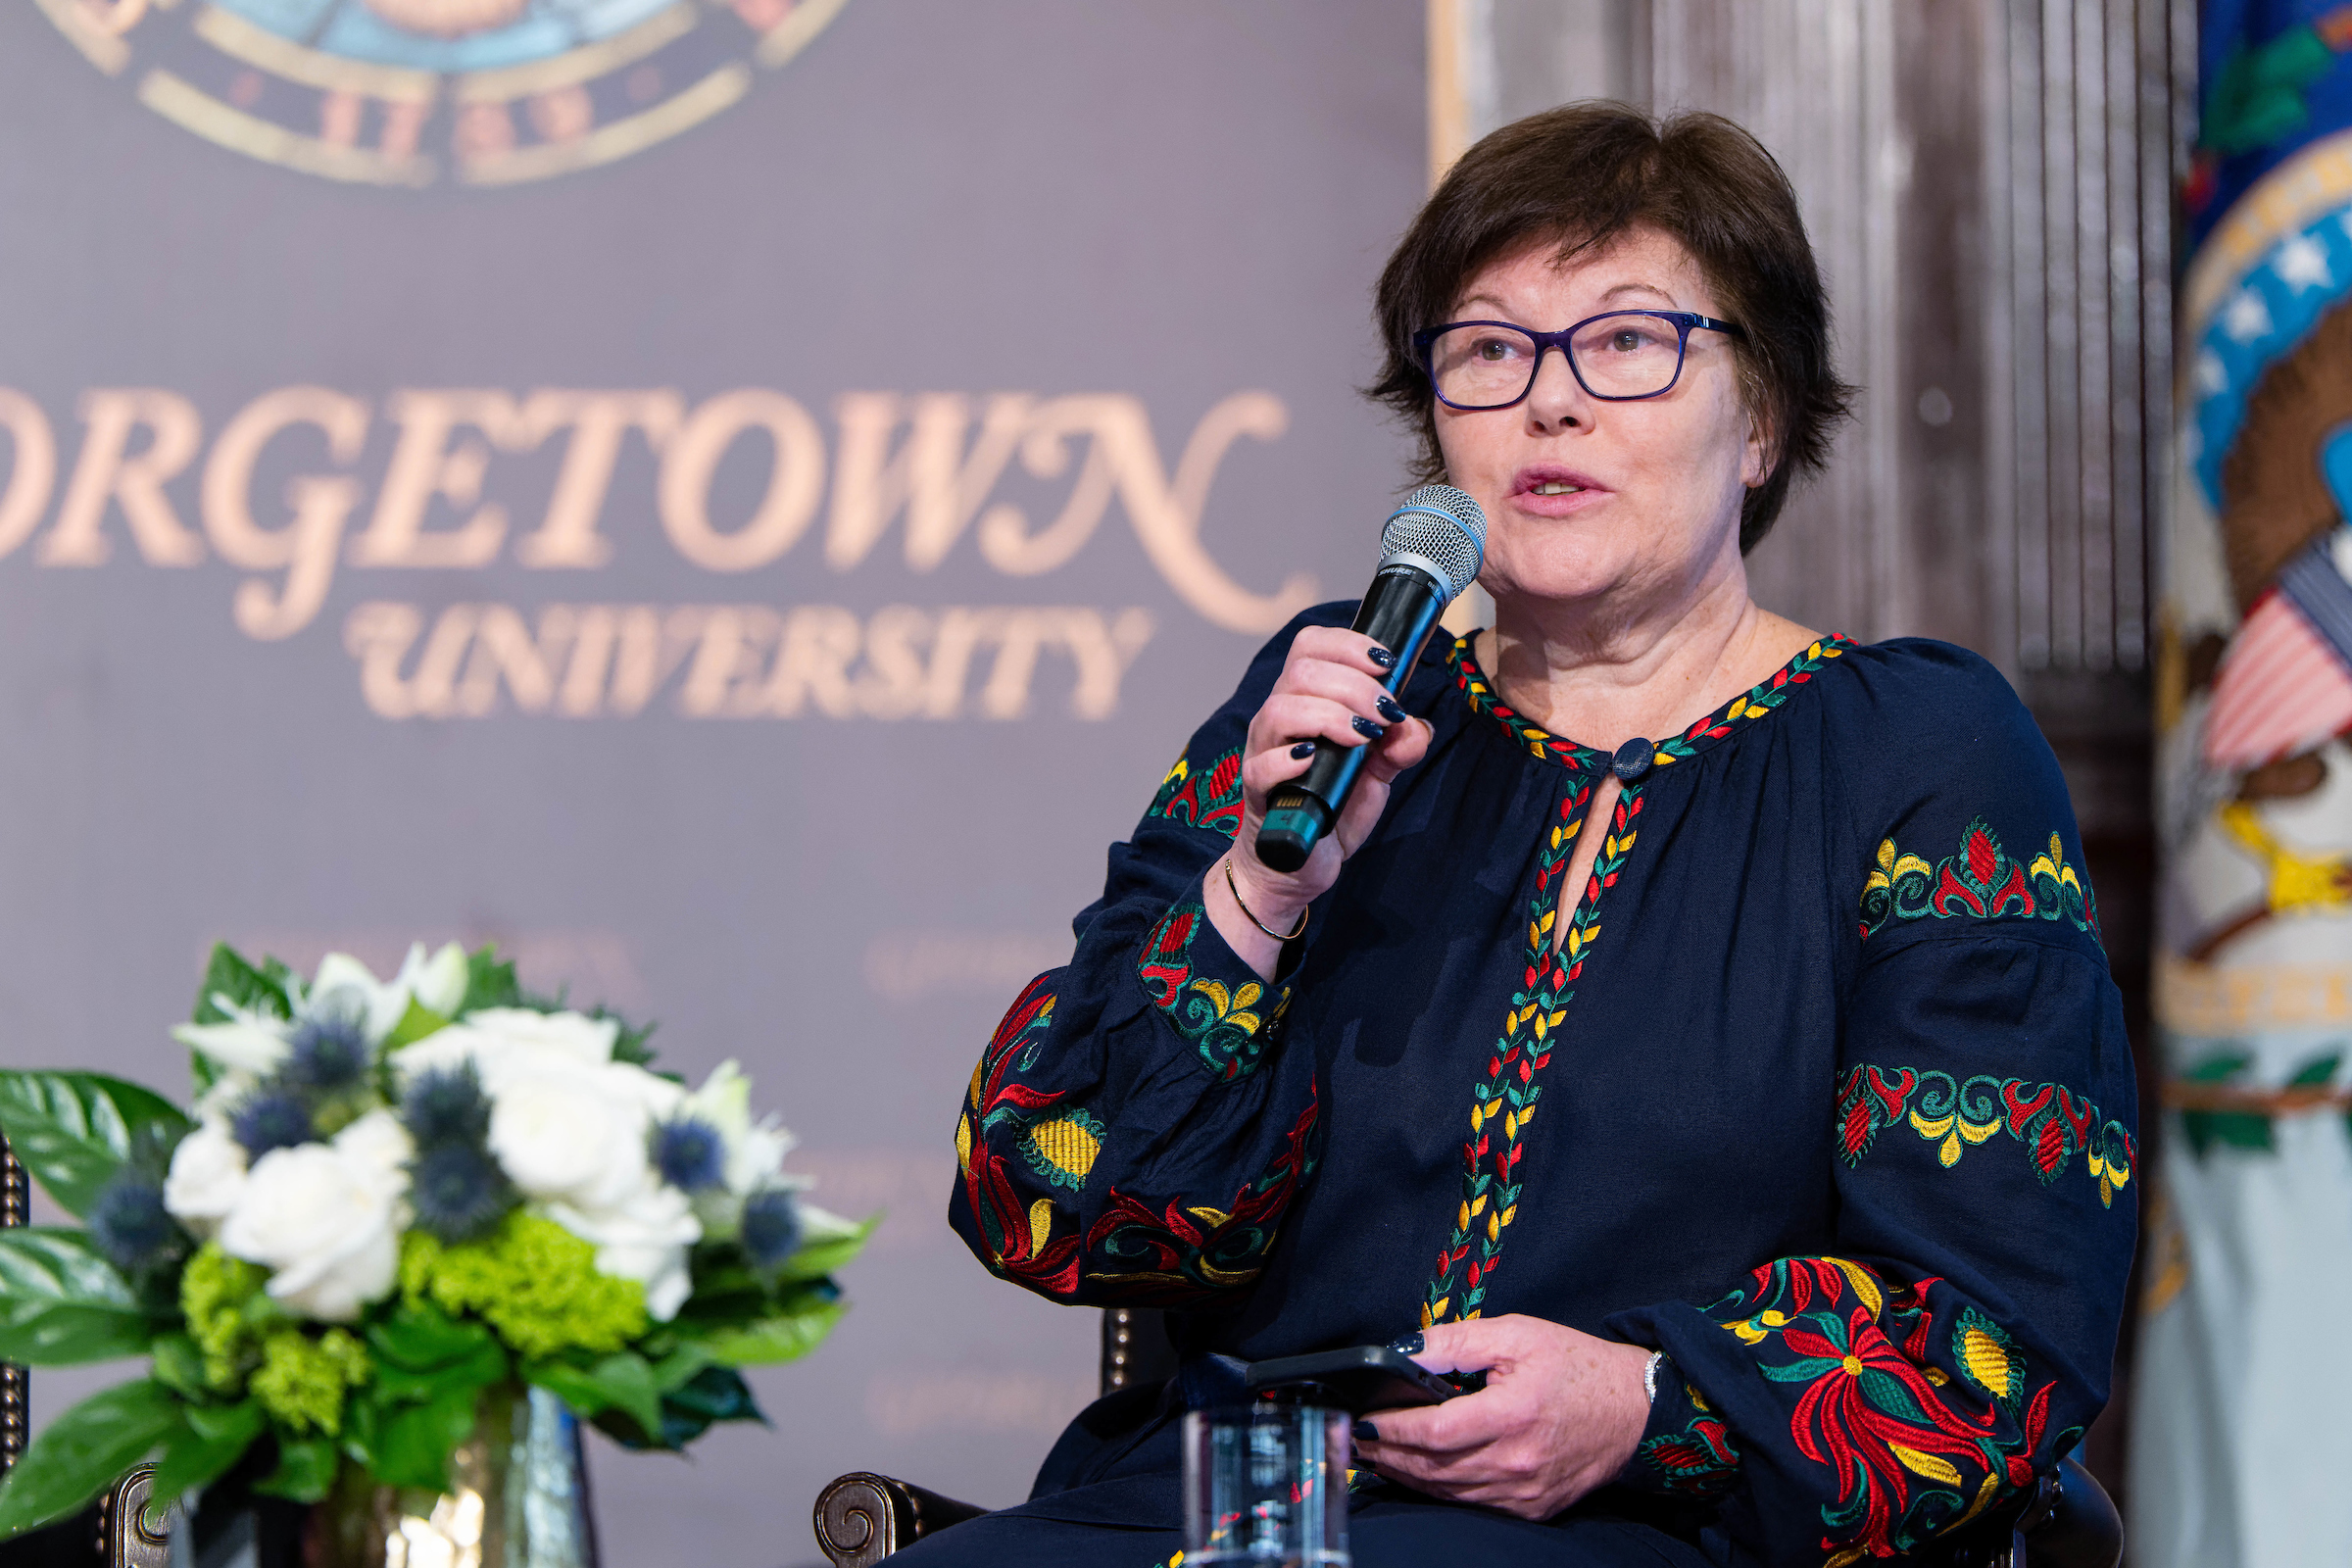 Kateryna Levchenko speaks into a microphone onstage with a Georgetown University sign in the background